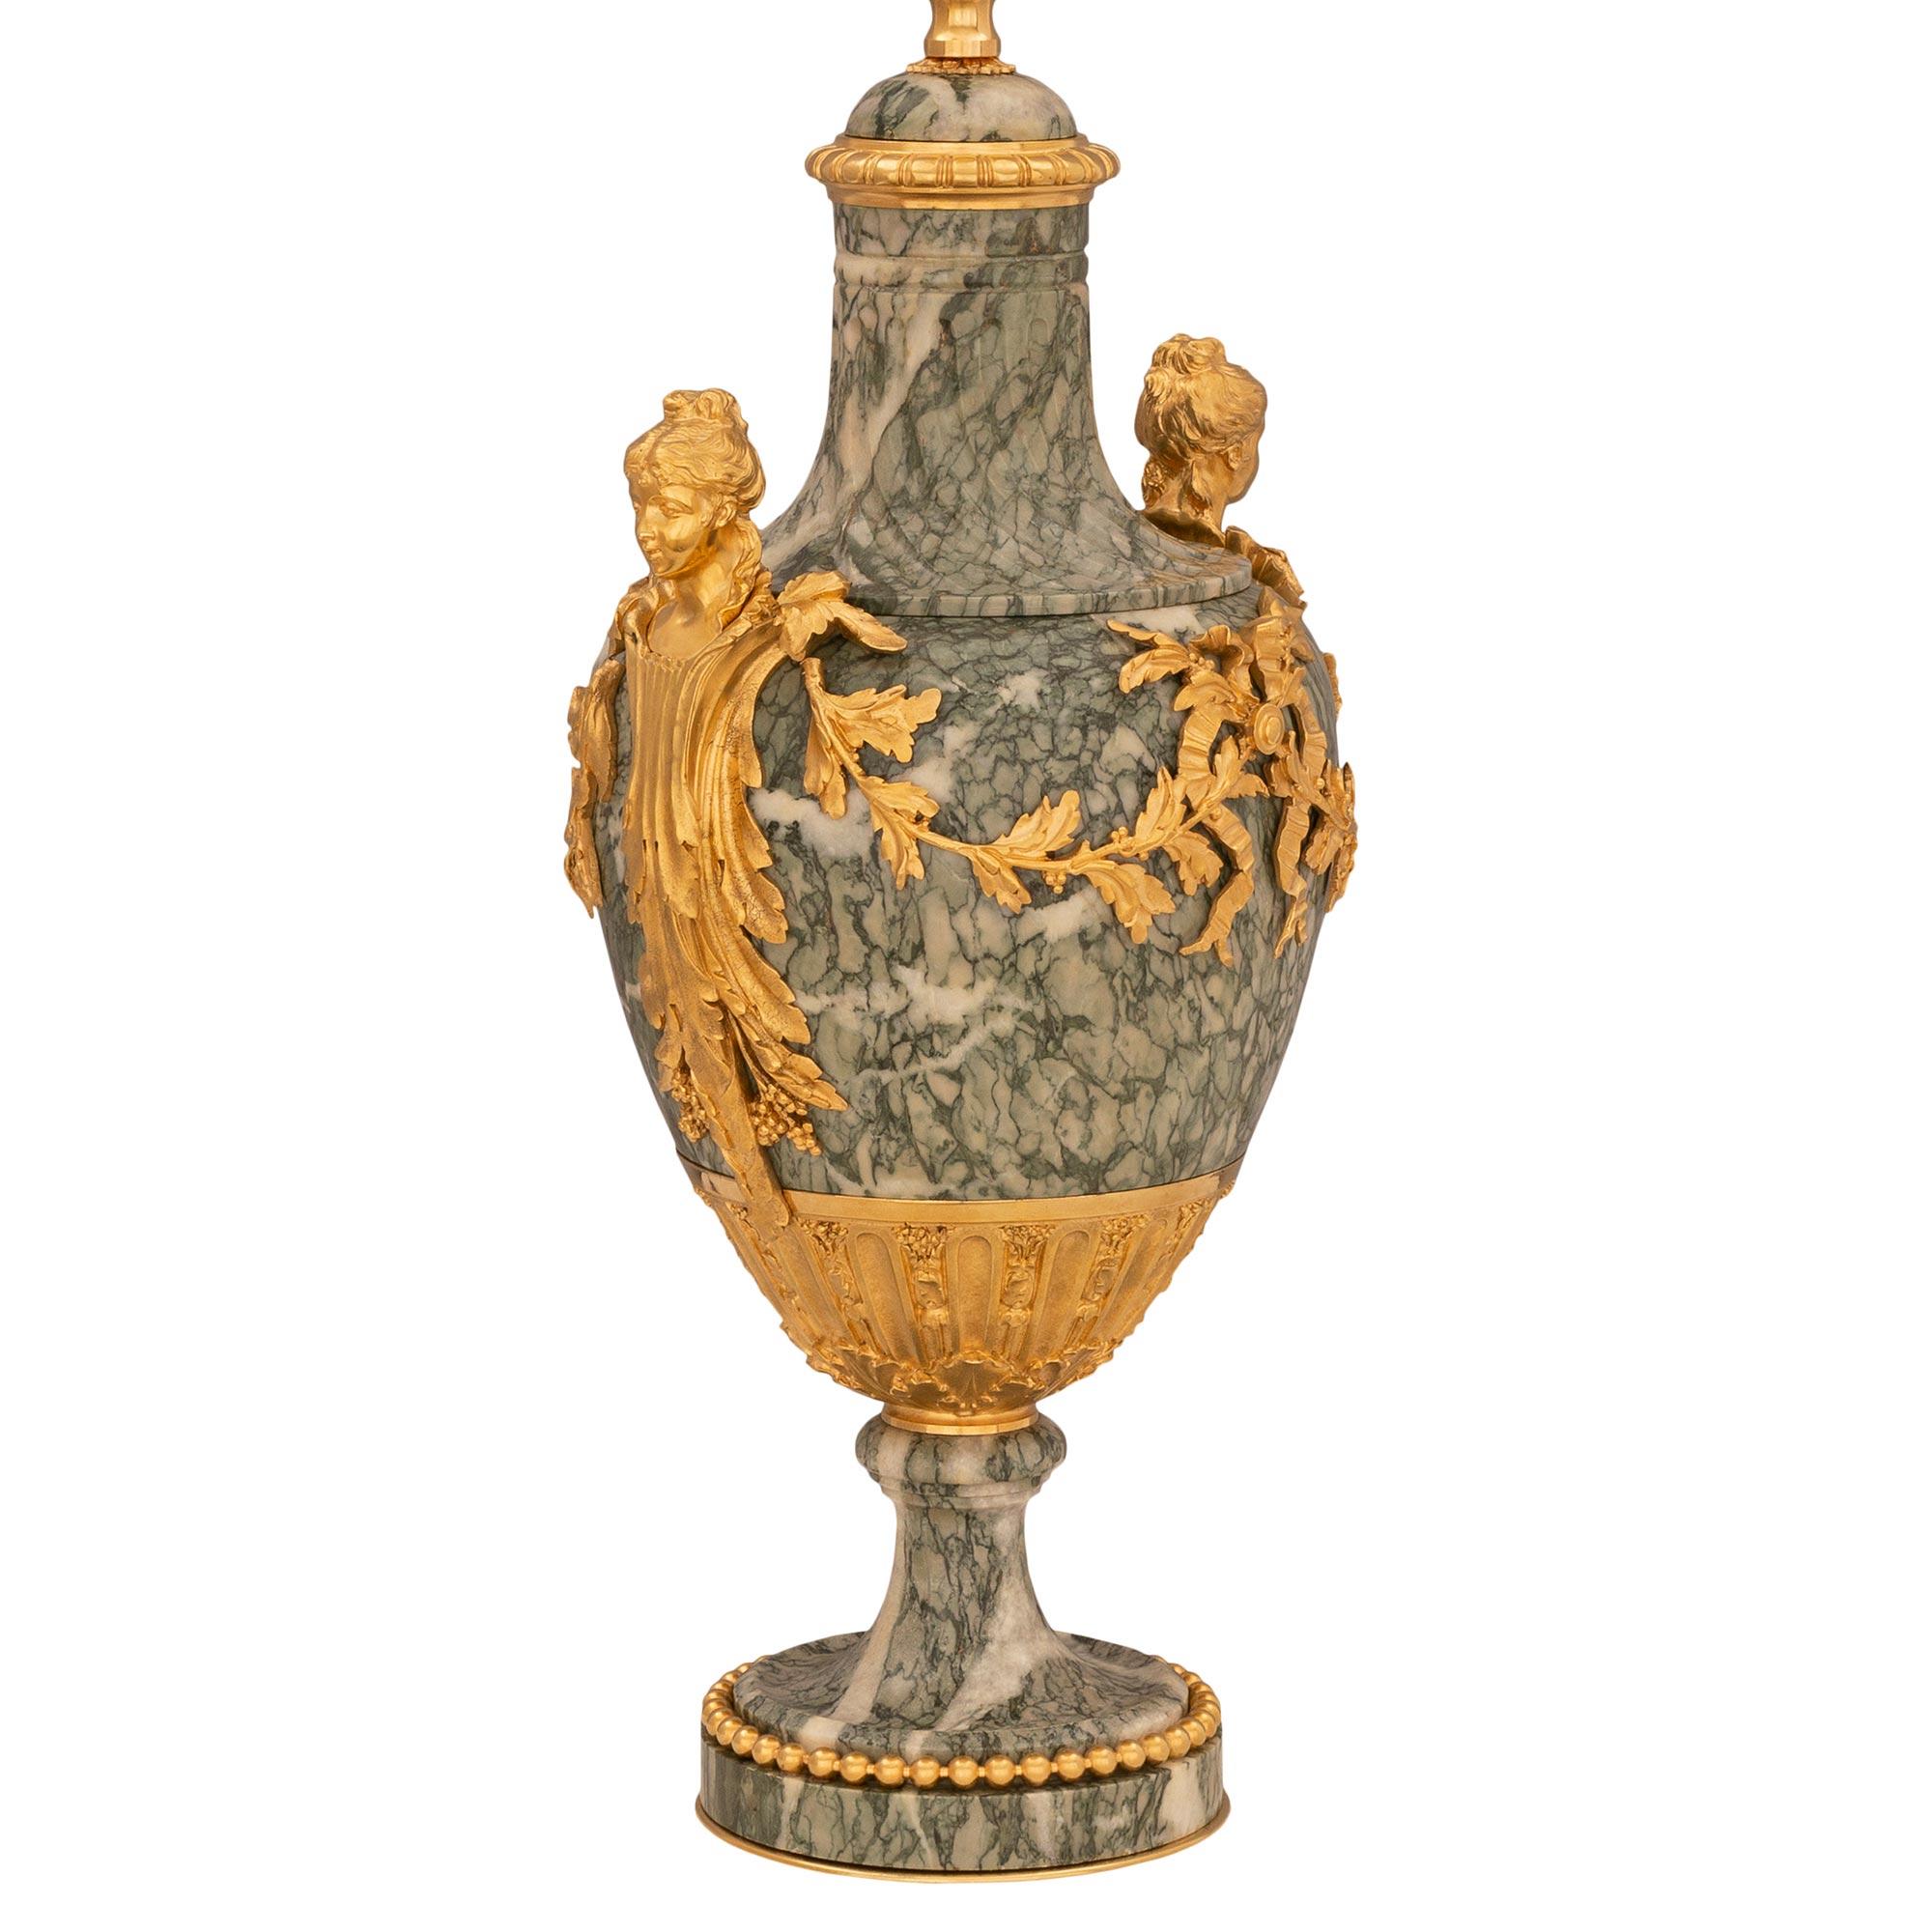 A striking and extremely elegant true pair of French 19th century Louis XVI st. ormolu and Vert Campan marble lamps attributed to Henry Dasson. Each lamp is raised by a circular base with a fine bottom ormolu fillet and a most decorative wrap around